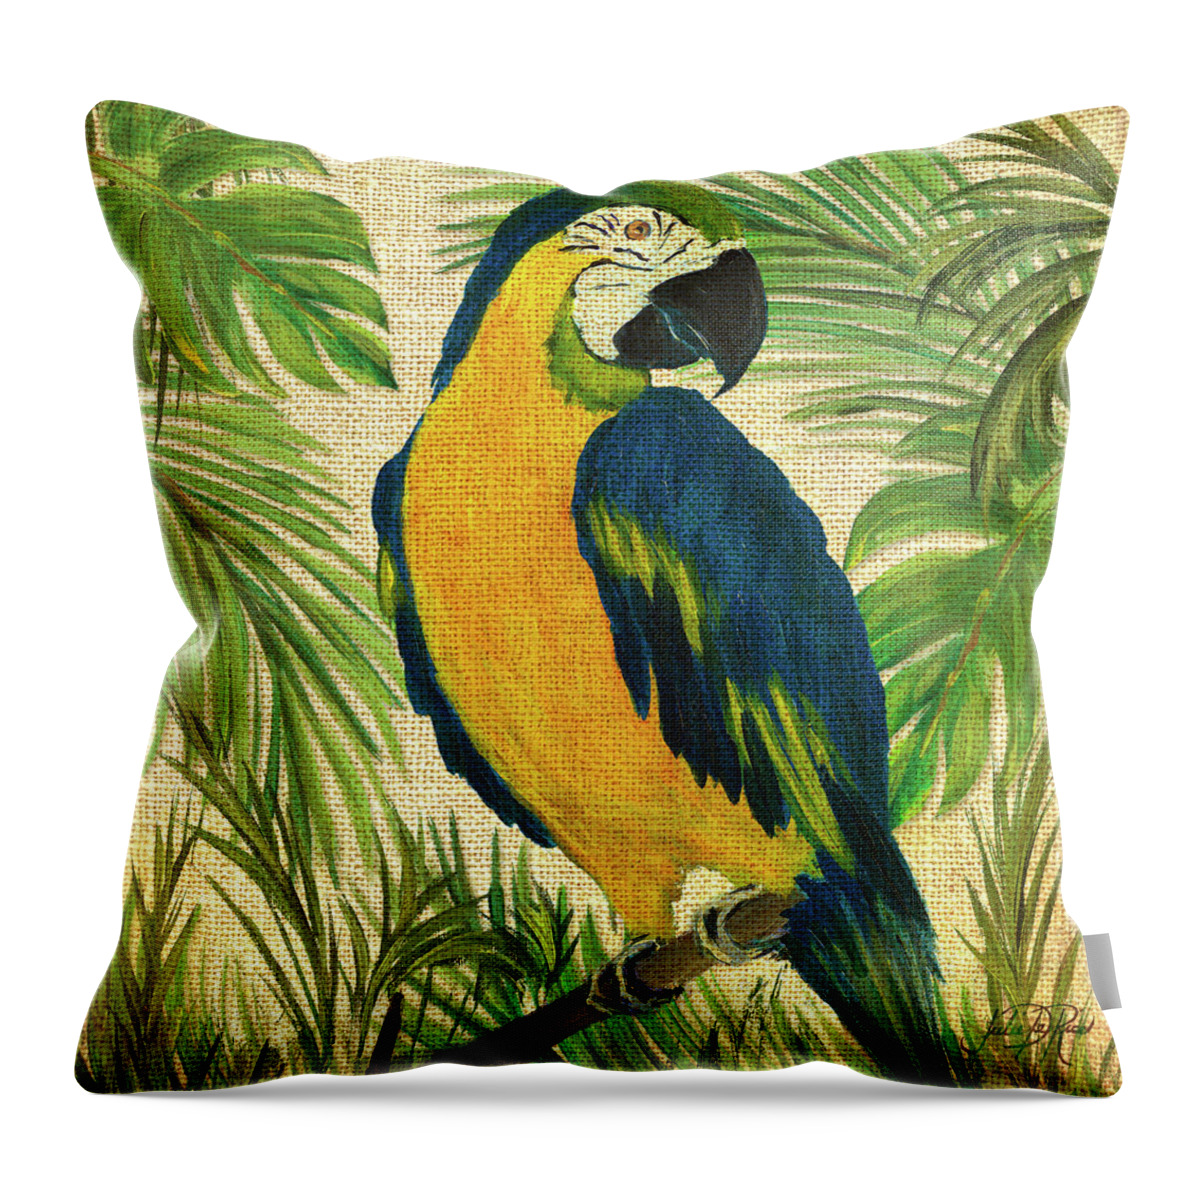 Island Throw Pillow featuring the painting Island Birds Square On Burlap II by Julie Derice